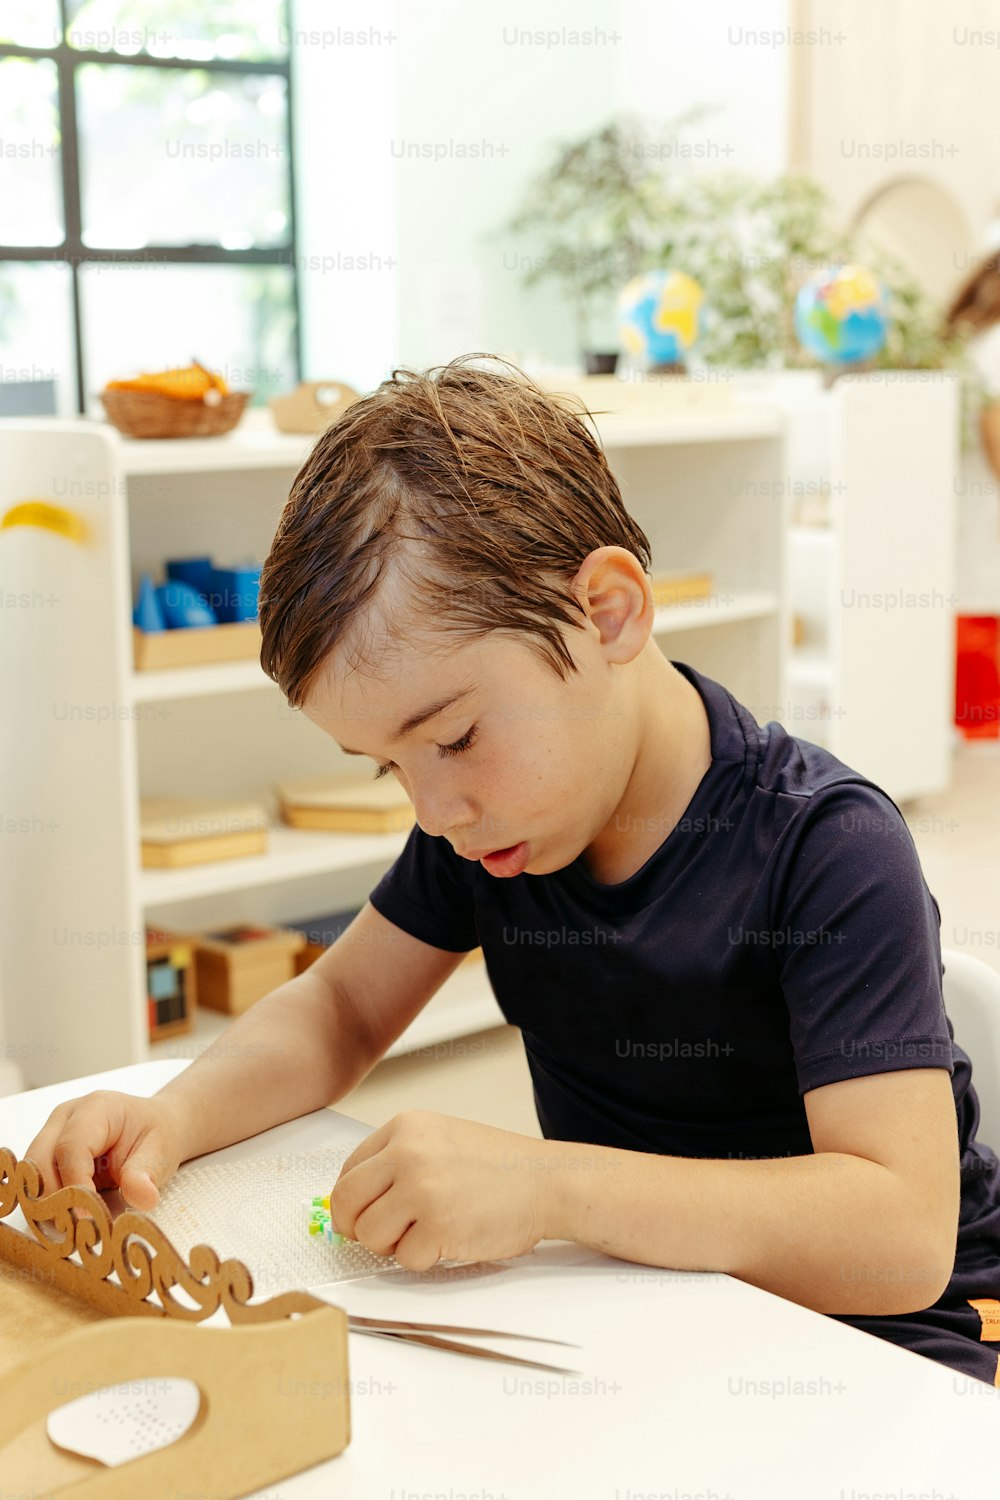 a young boy sitting at a table working on a project